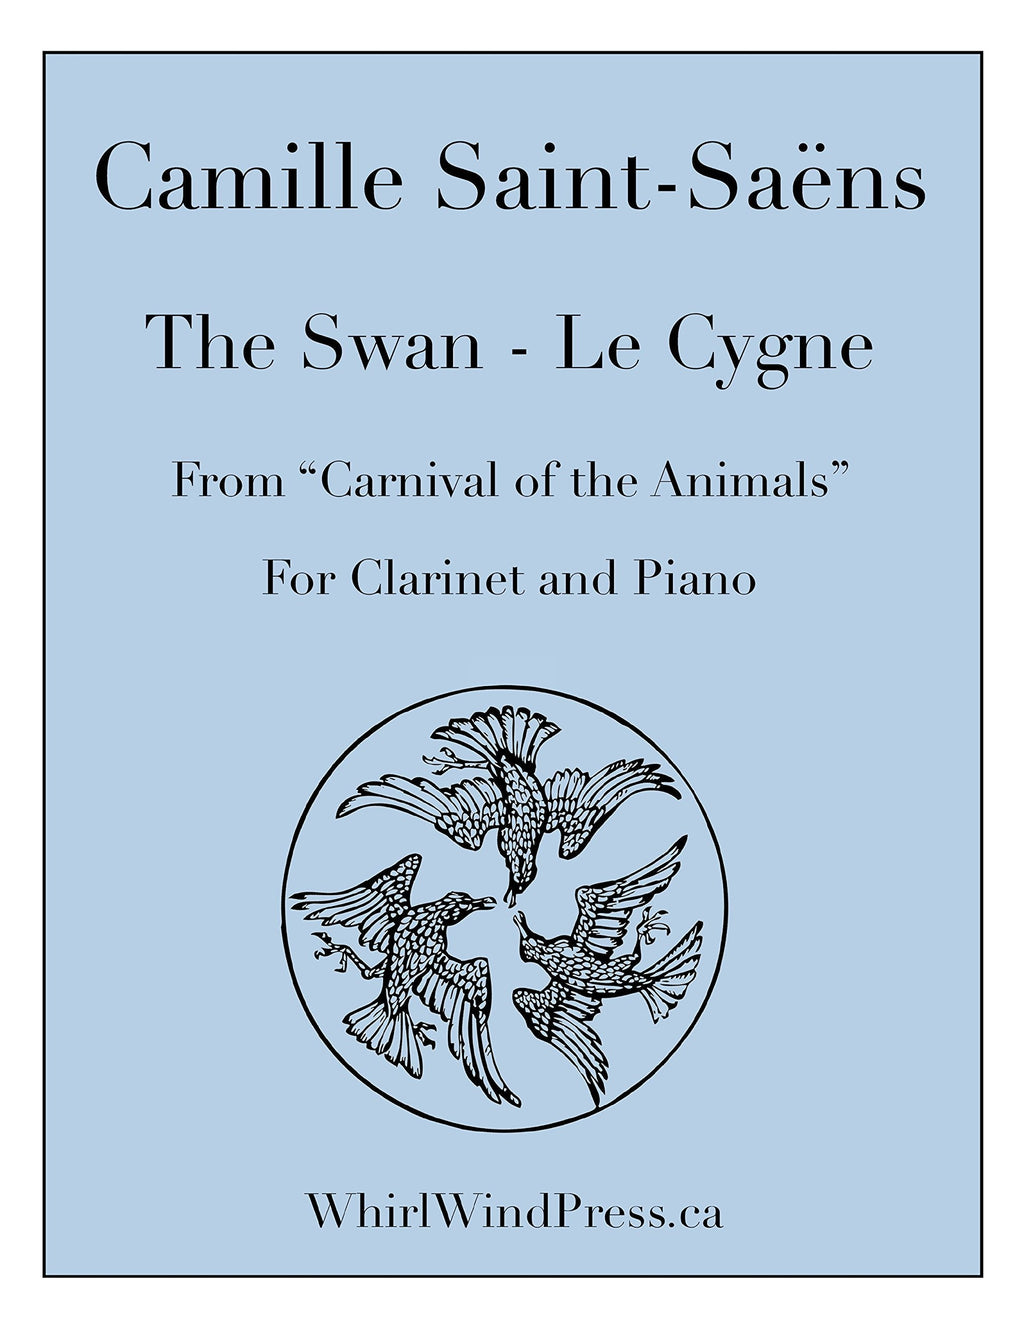 The Swan - Le Cygne for Clarinet & Piano - by Camille Saint-Saëns - From The Carnival of the Animals/Carnival Des Animaux